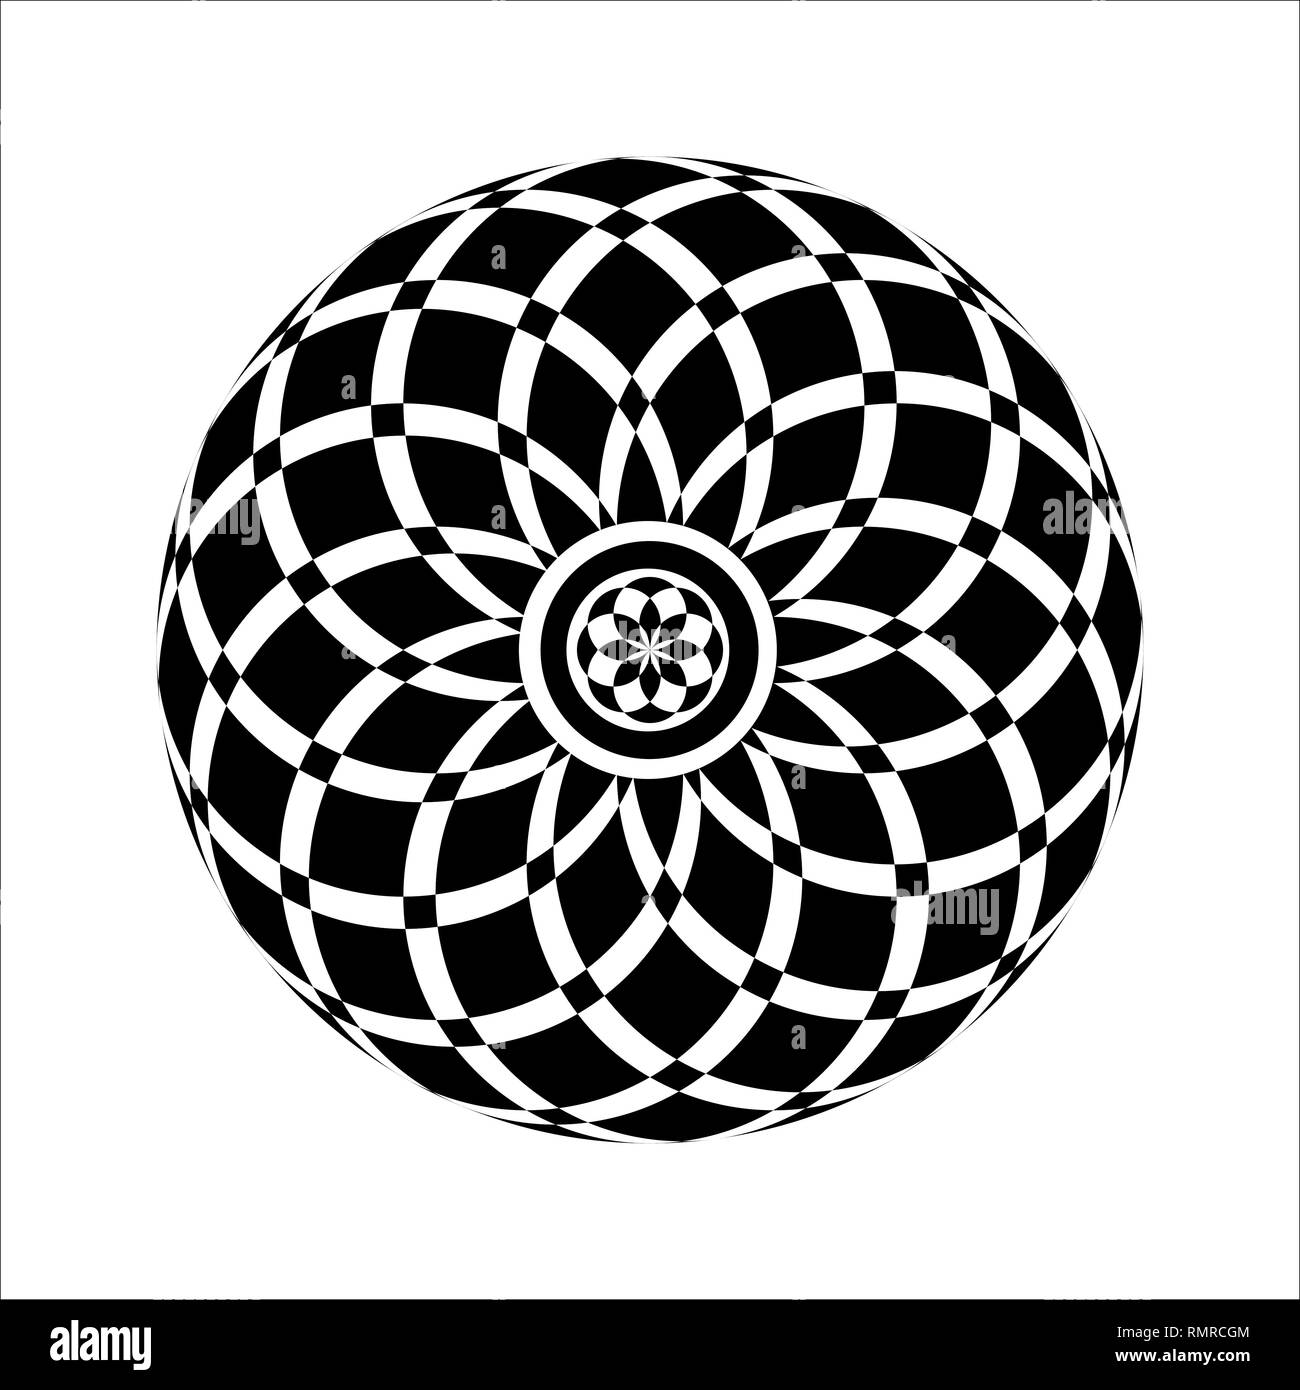 Monochrome elegant circular pattern in black and white. Circular mathematical ornament. A vector circular pattern from the crossed circles. Mandala. Stock Vector